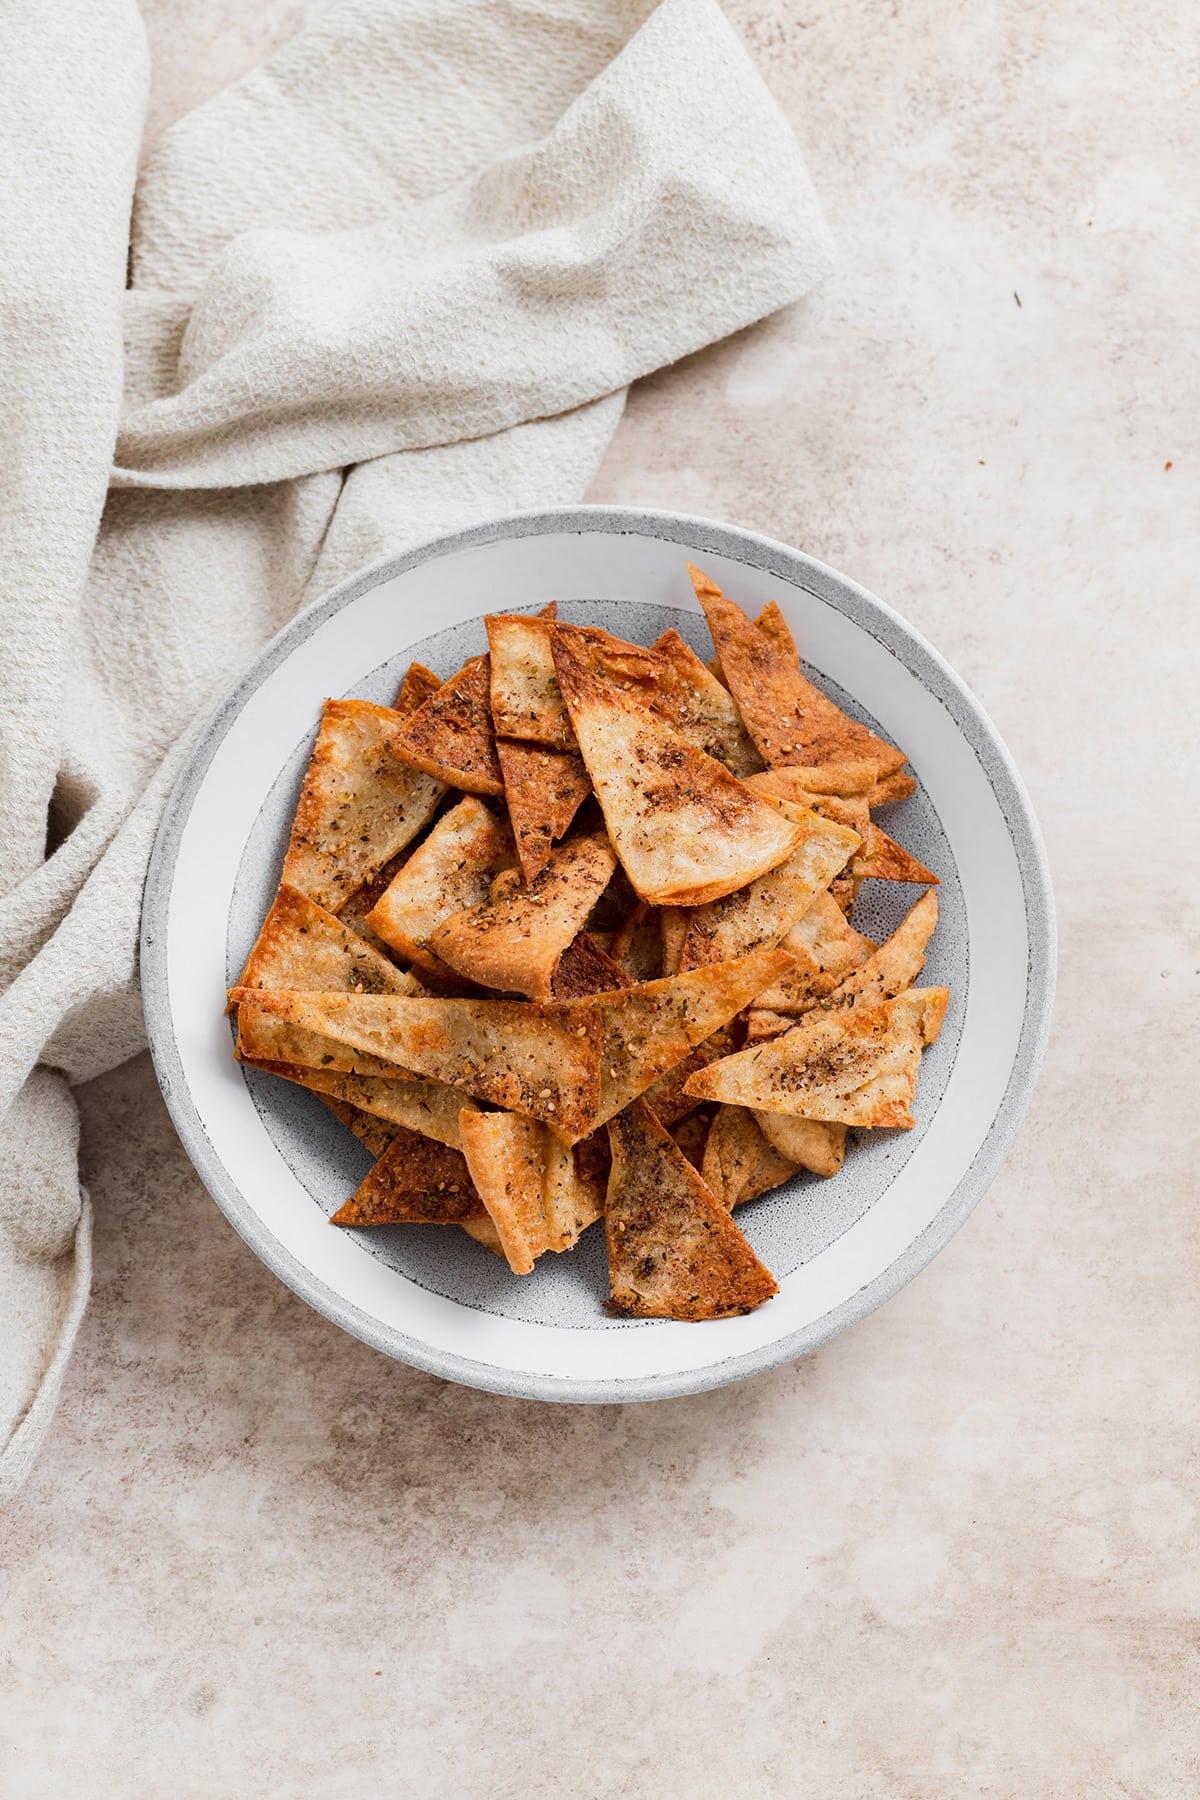 Homemade pita chips in a grey bowl on a beige background with a beige tea towel in the top left corner.